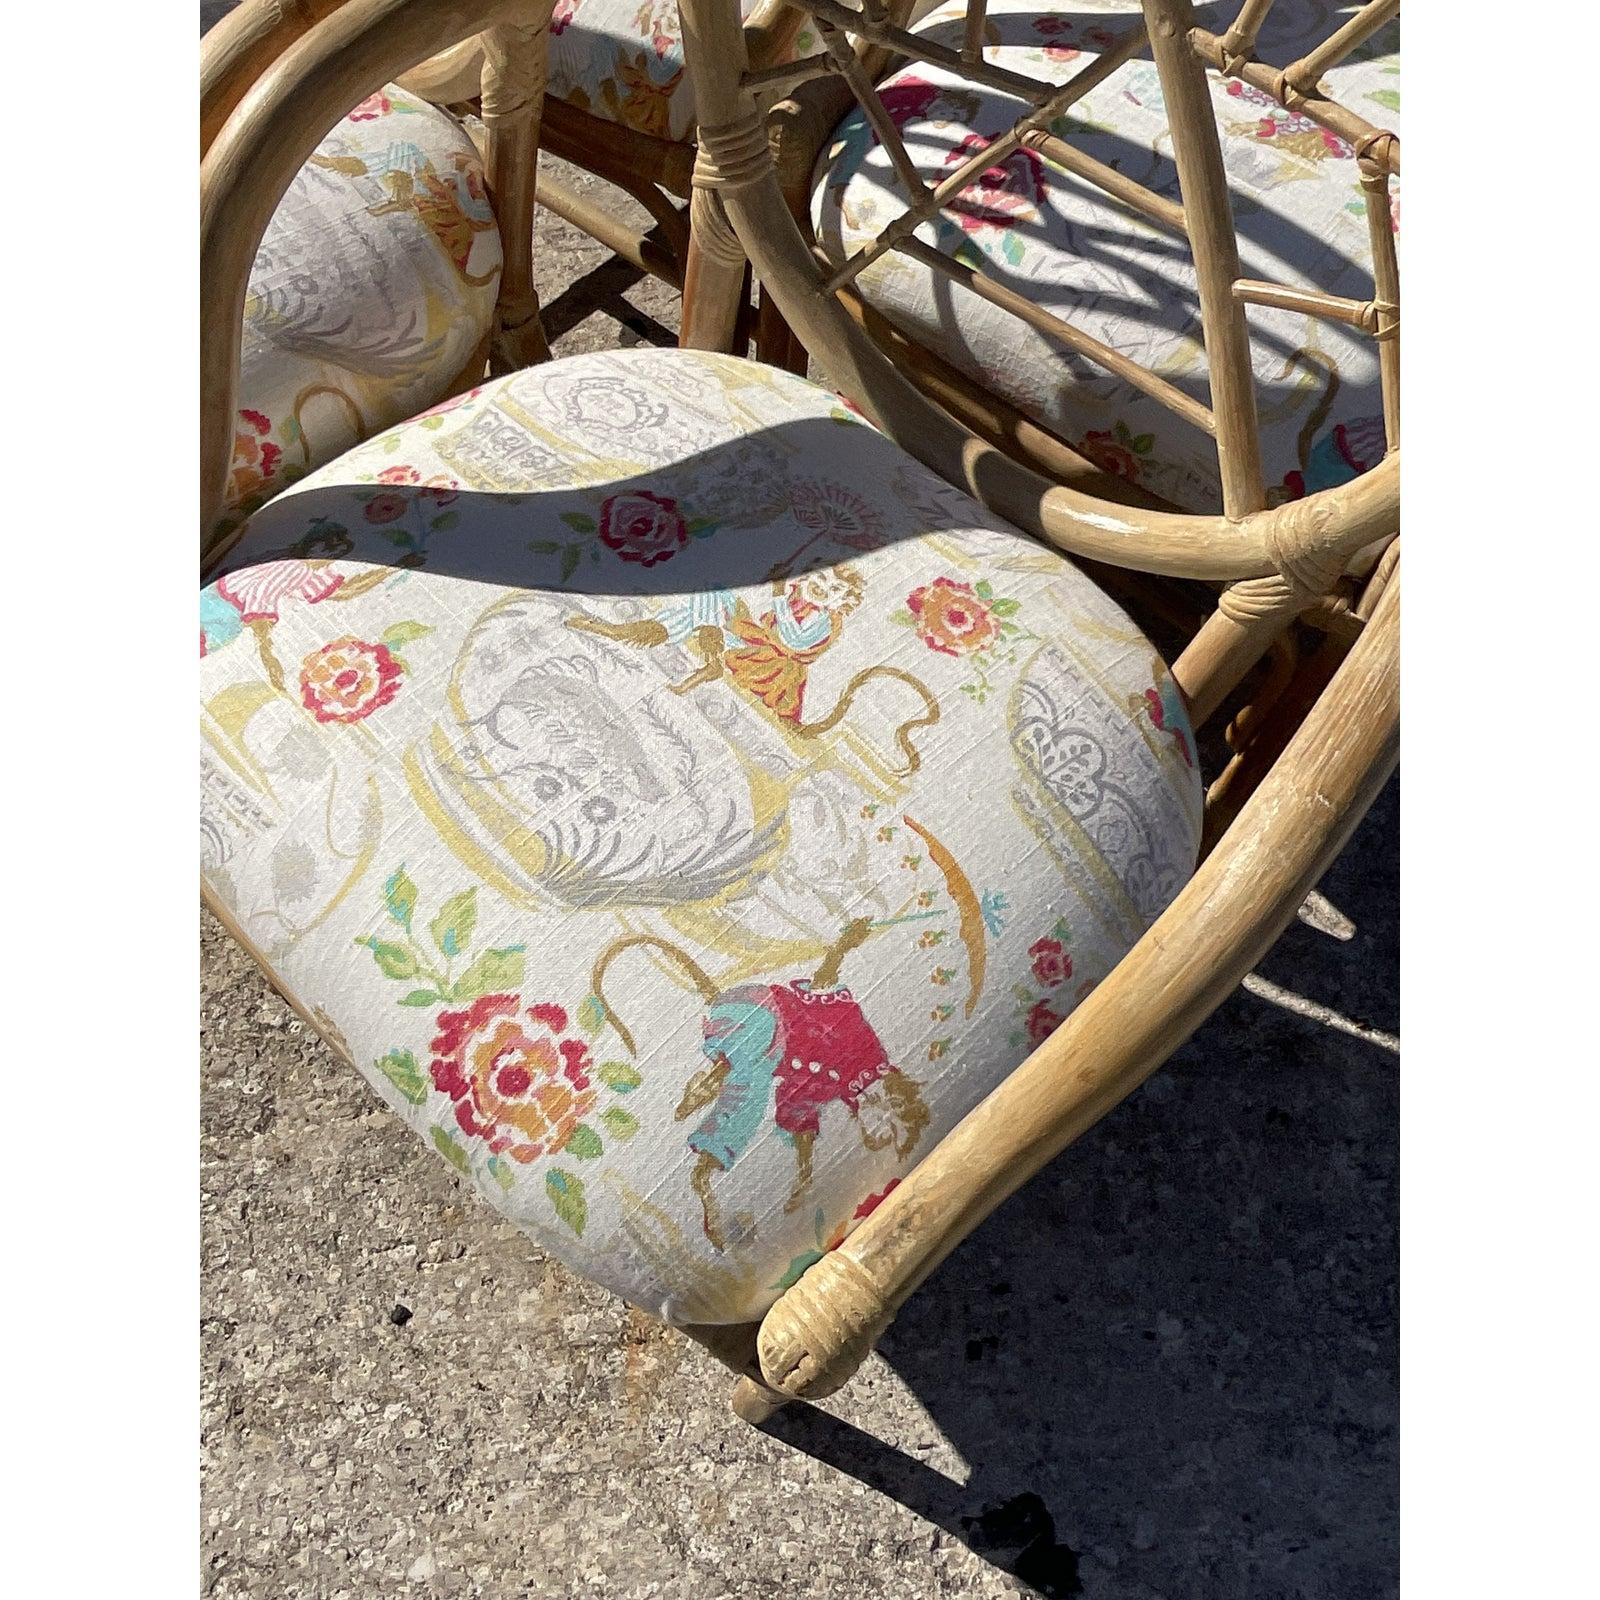 Gorgeous set of four bent rattan dining chairs. A chic light cerused finish In the iconic “Cracked Ice” design. Done in the manner of McGuire. Fabulous chinoiserie printed upholstery with charming monkeys at play. Acquired from a Palm Beach estate.